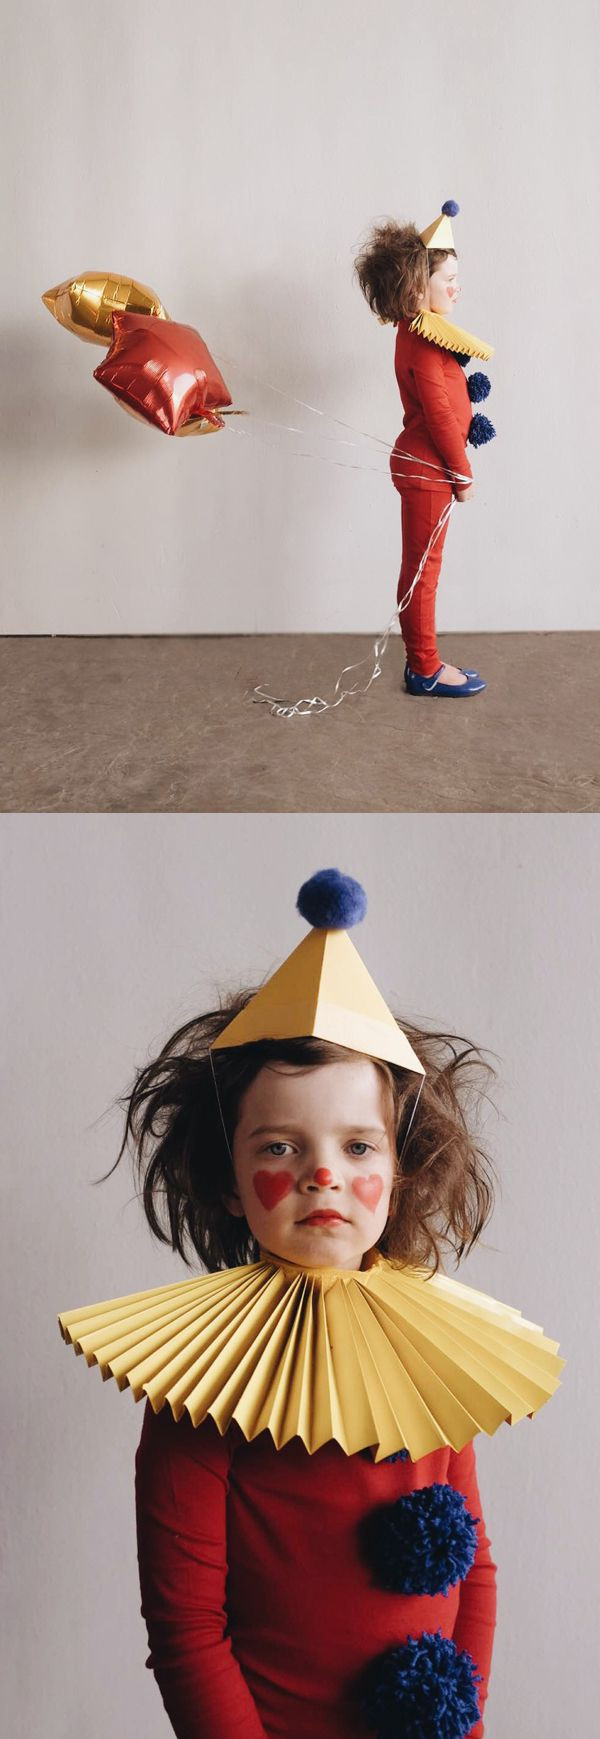 DIY Circus Costumes
 25 best ideas about Clown Costumes on Pinterest